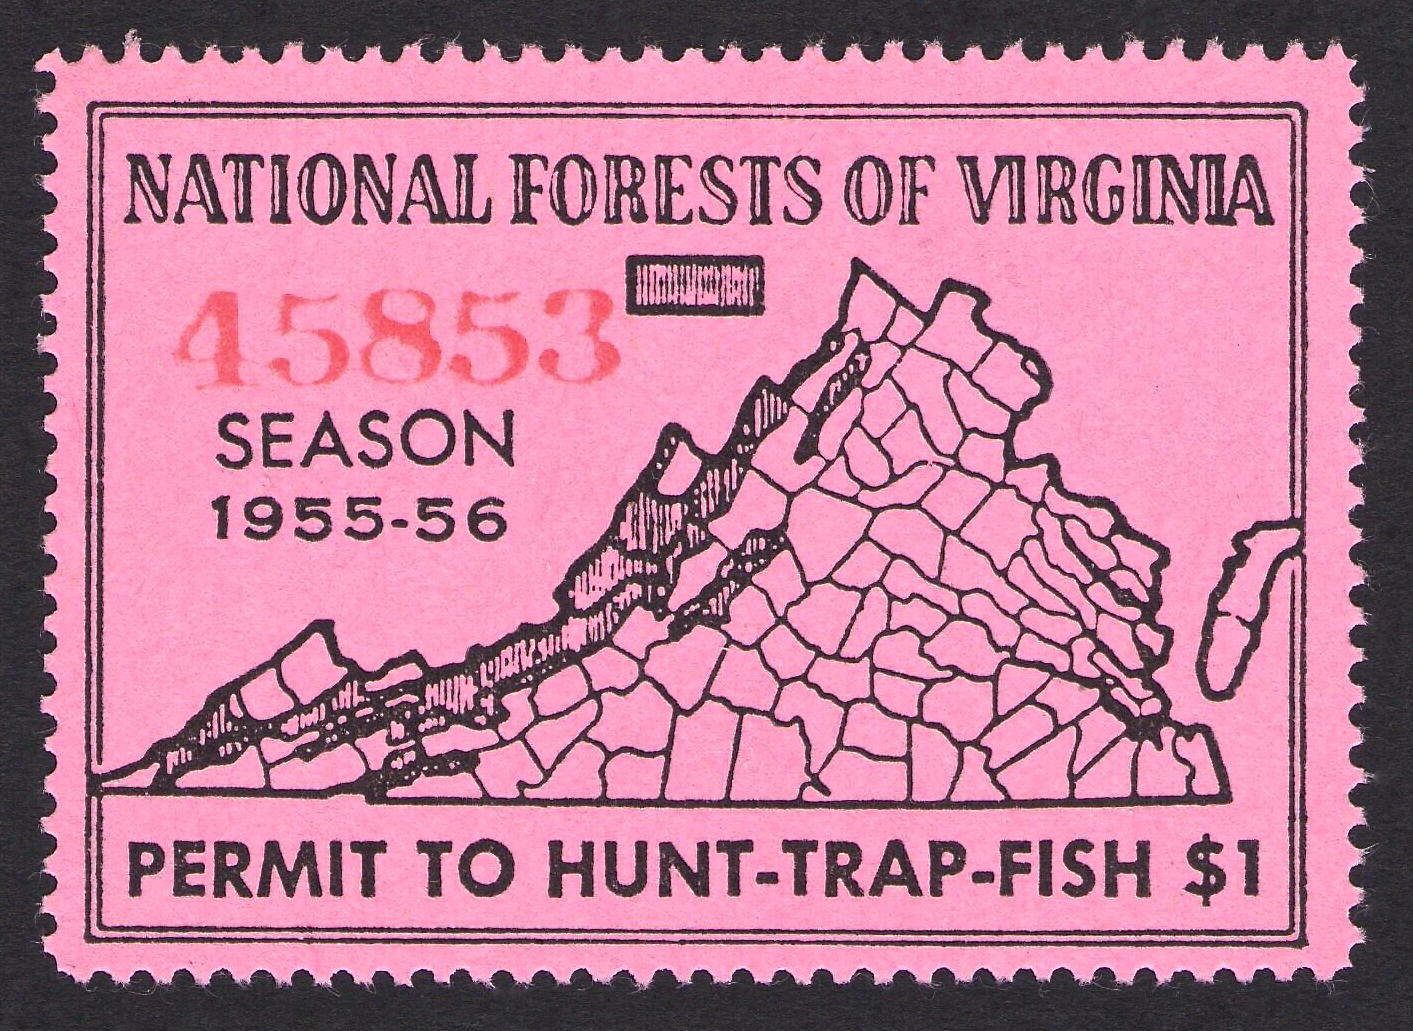 1955-56 National Forest Virginia